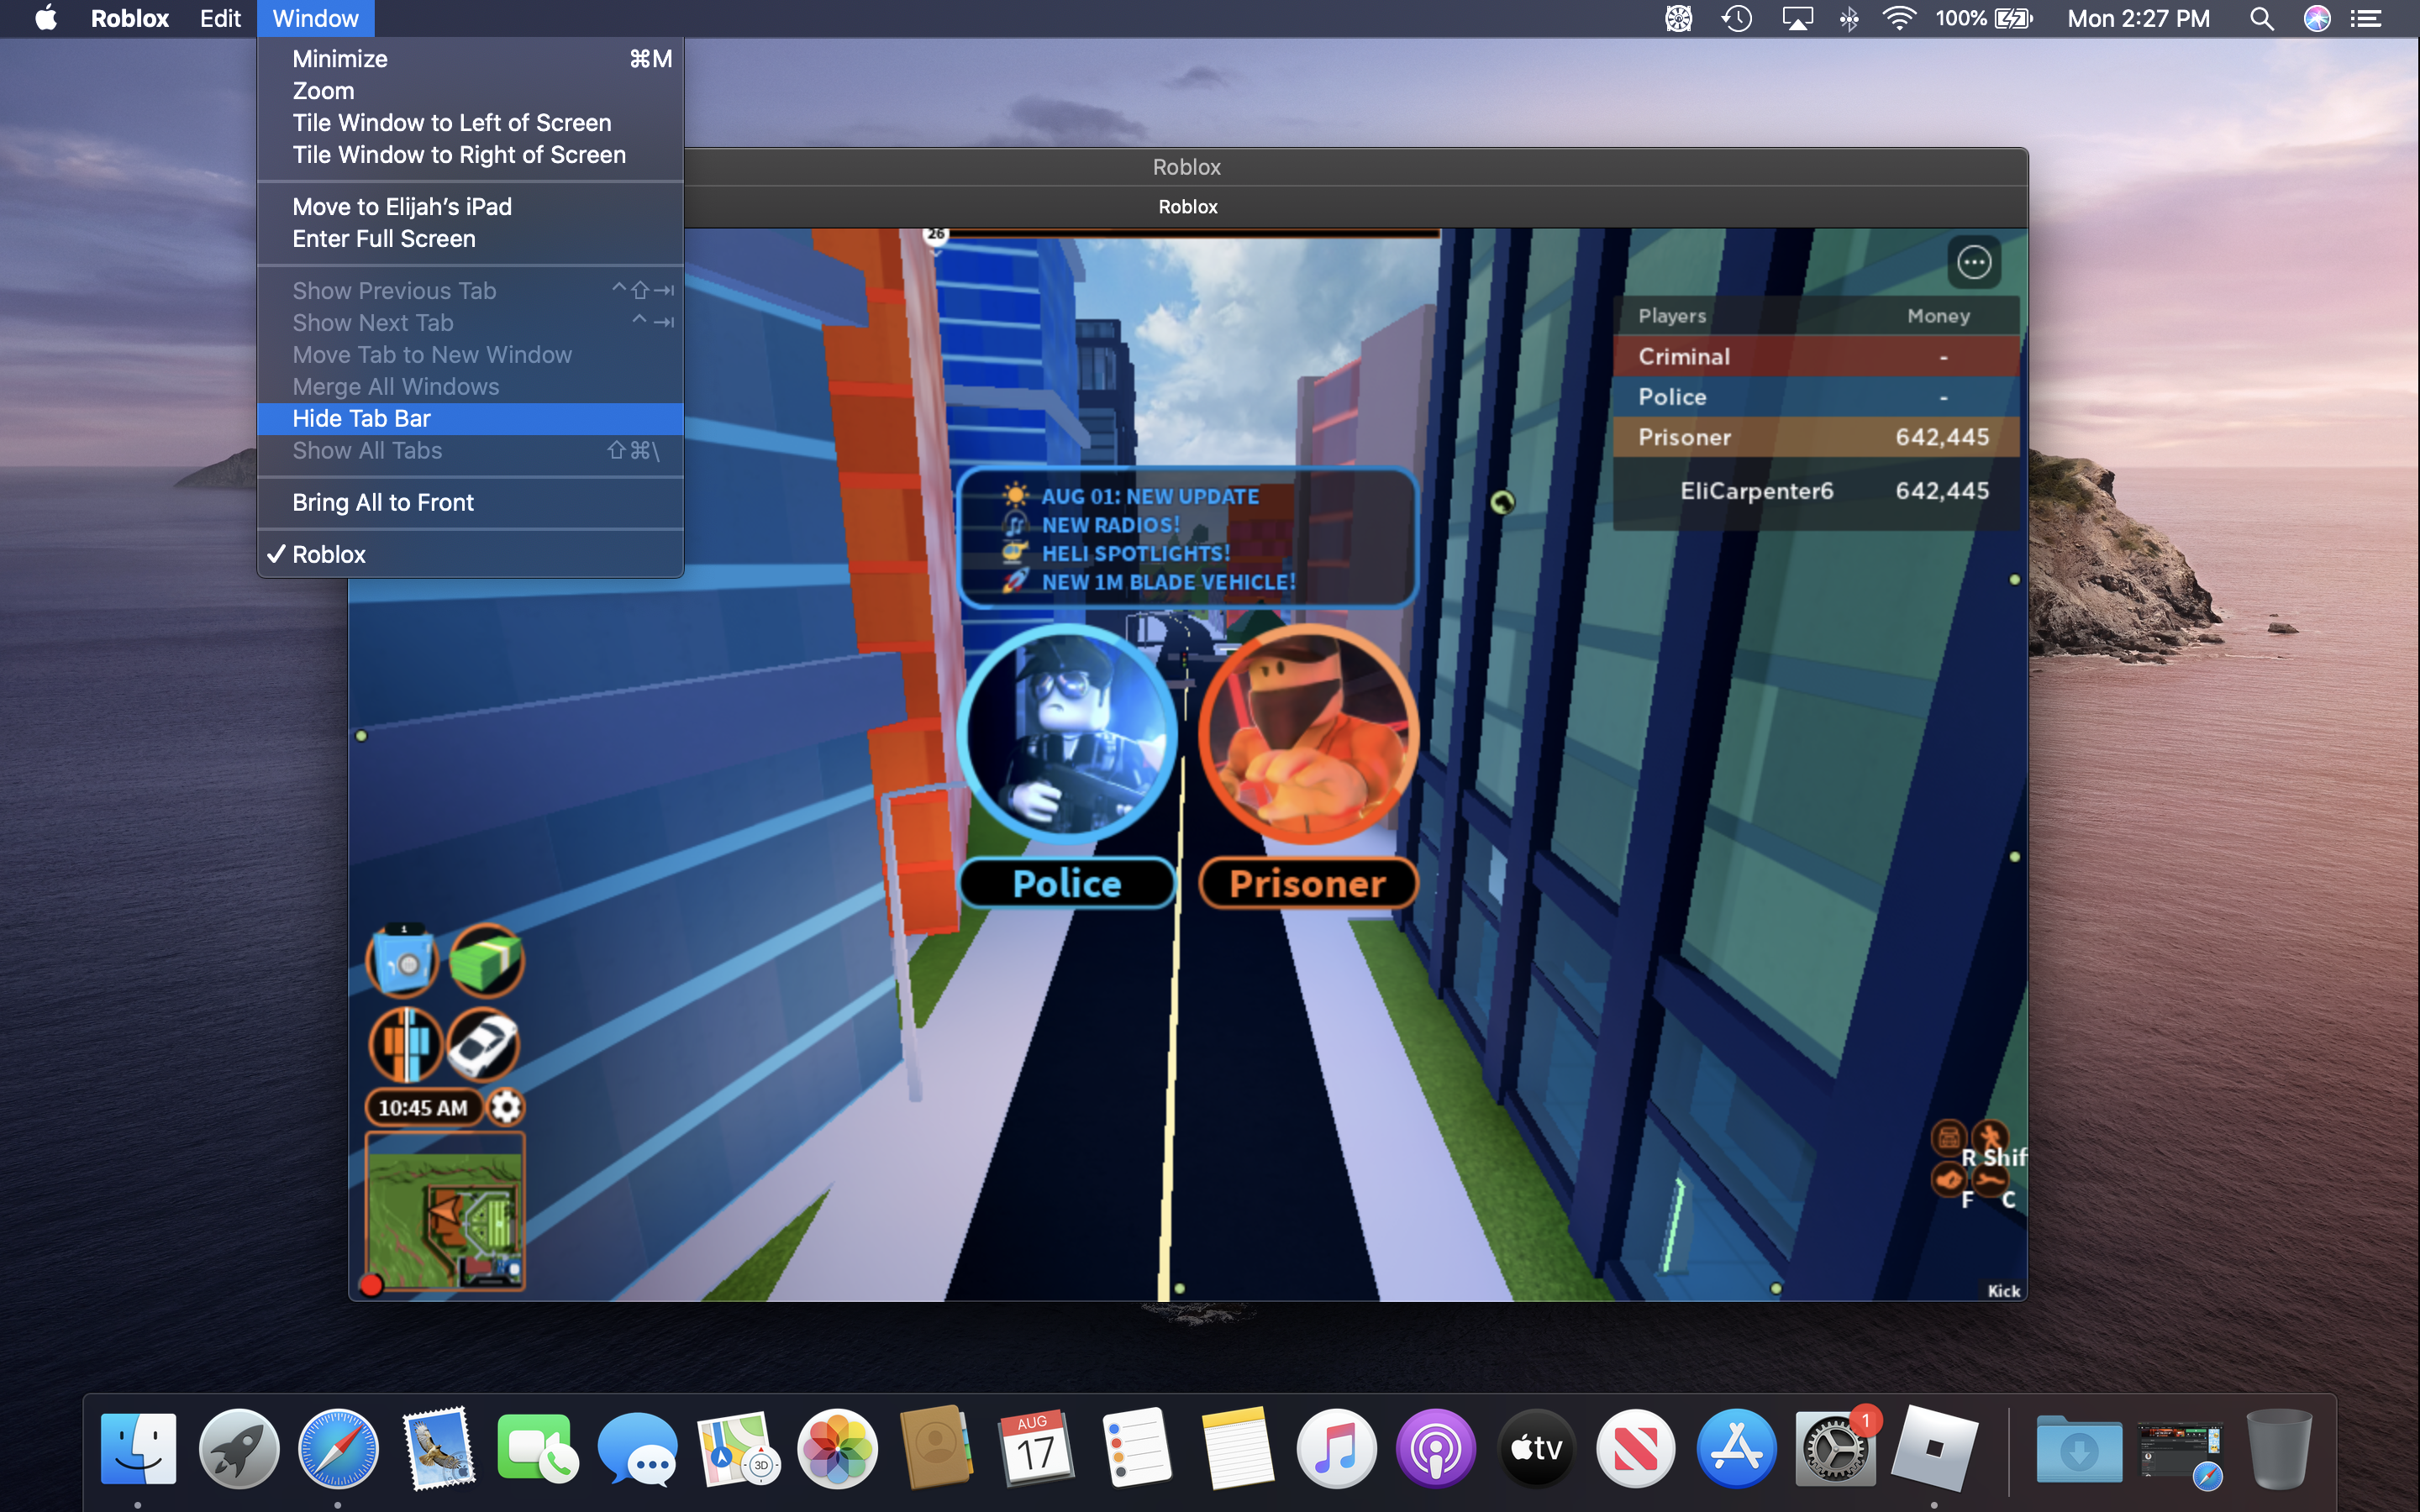 How to Control Roblox on Mac? 5